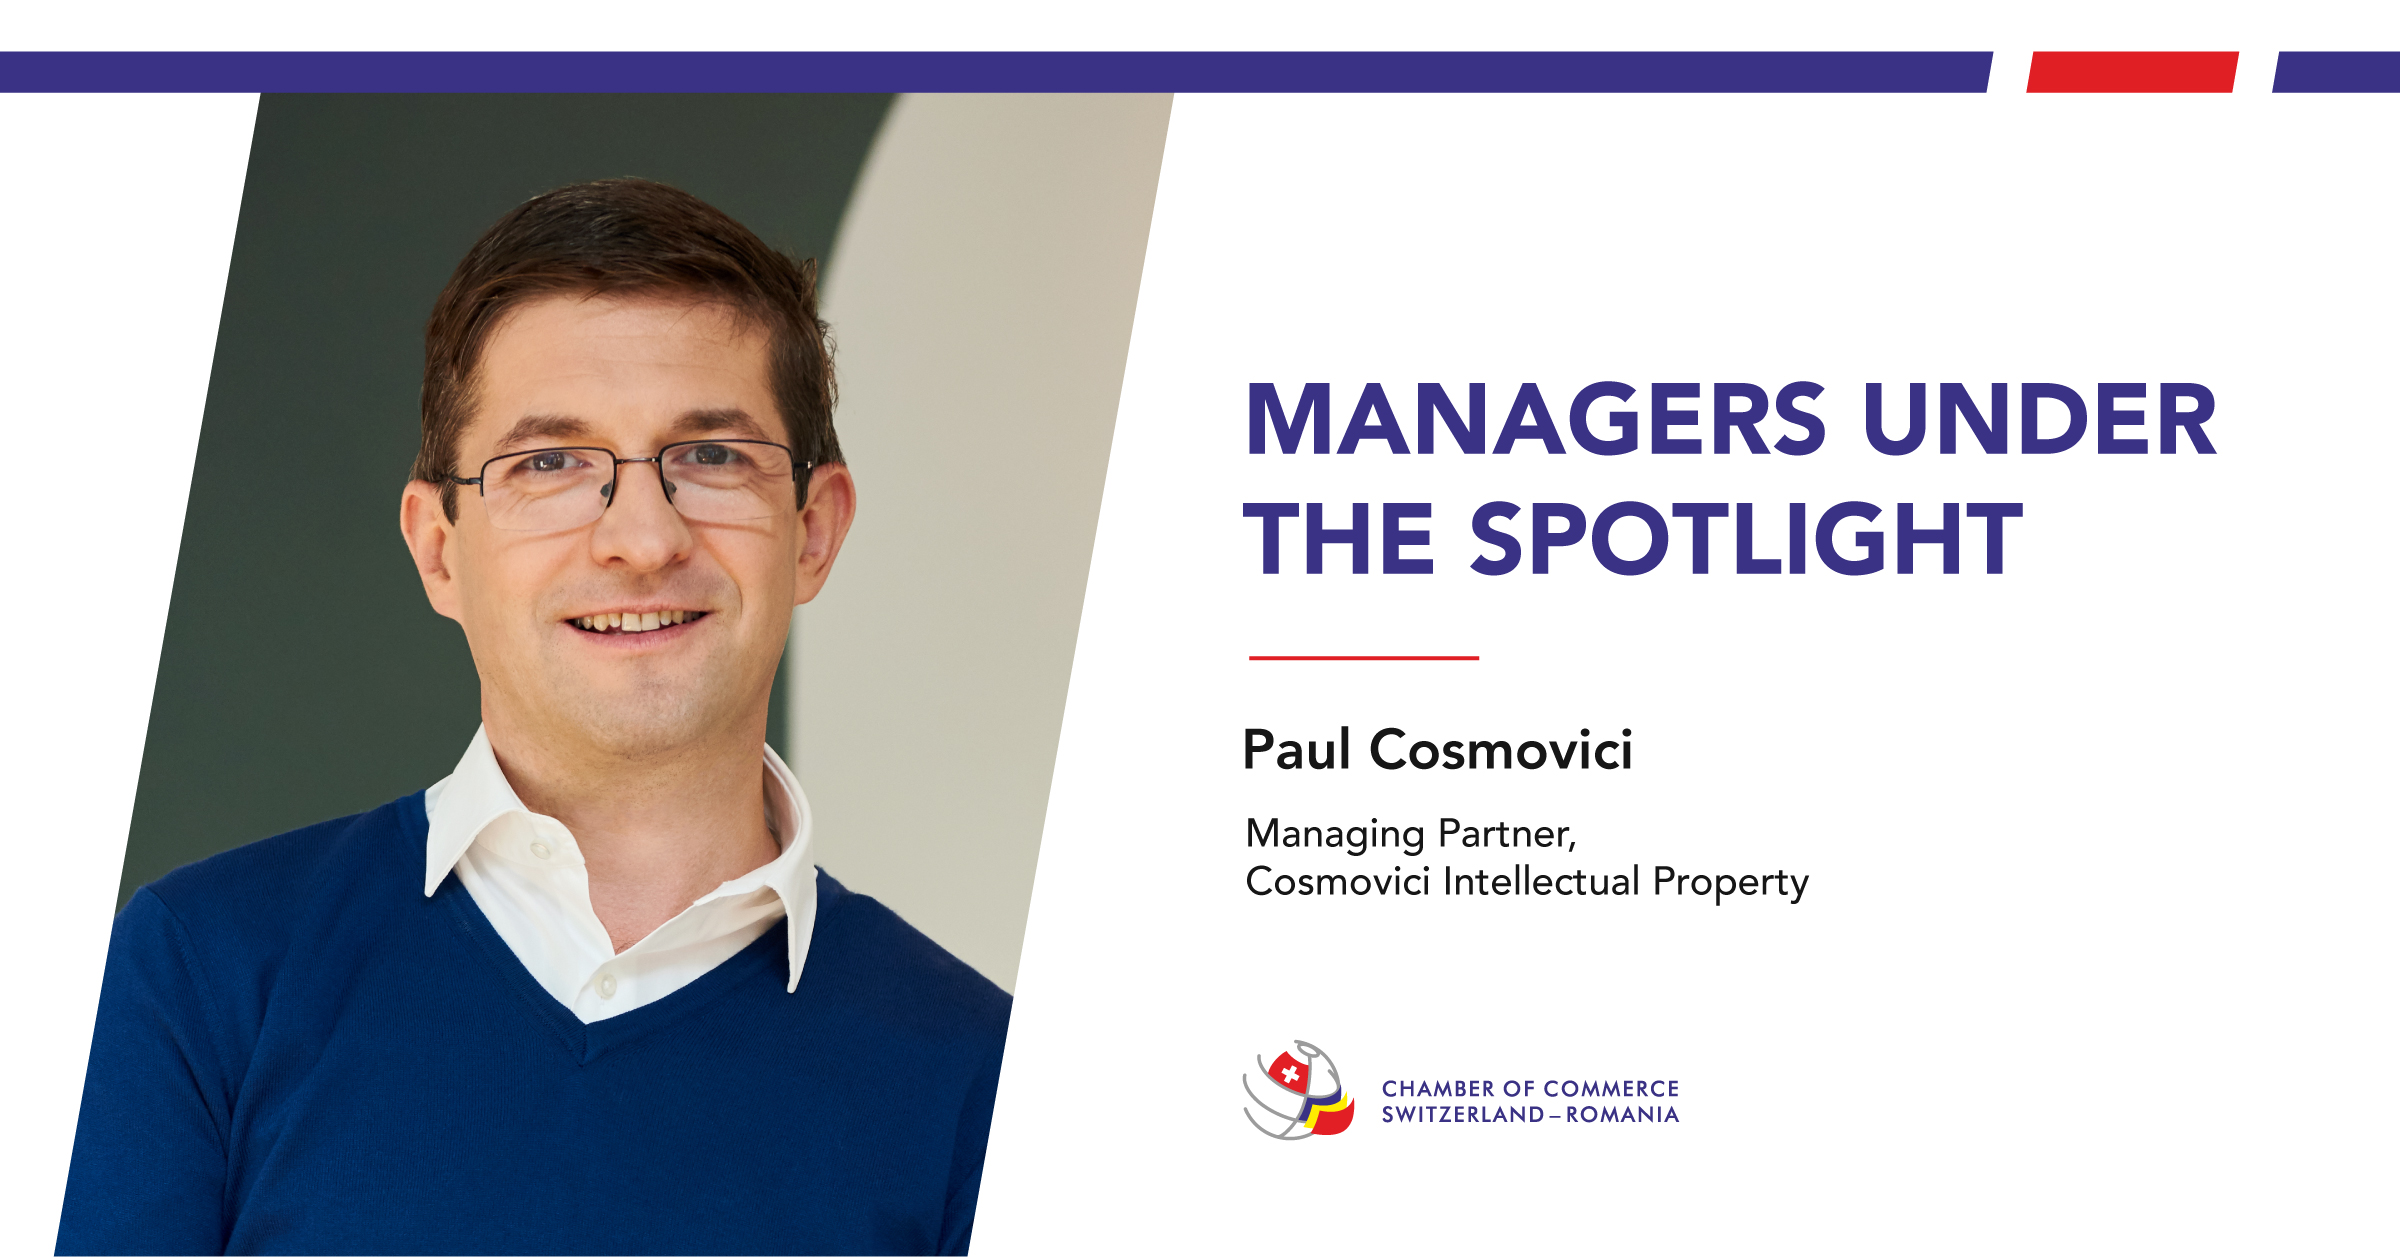 Managers under the spotlight - Paul Cosmovici, Cosmovici Intellectual Property